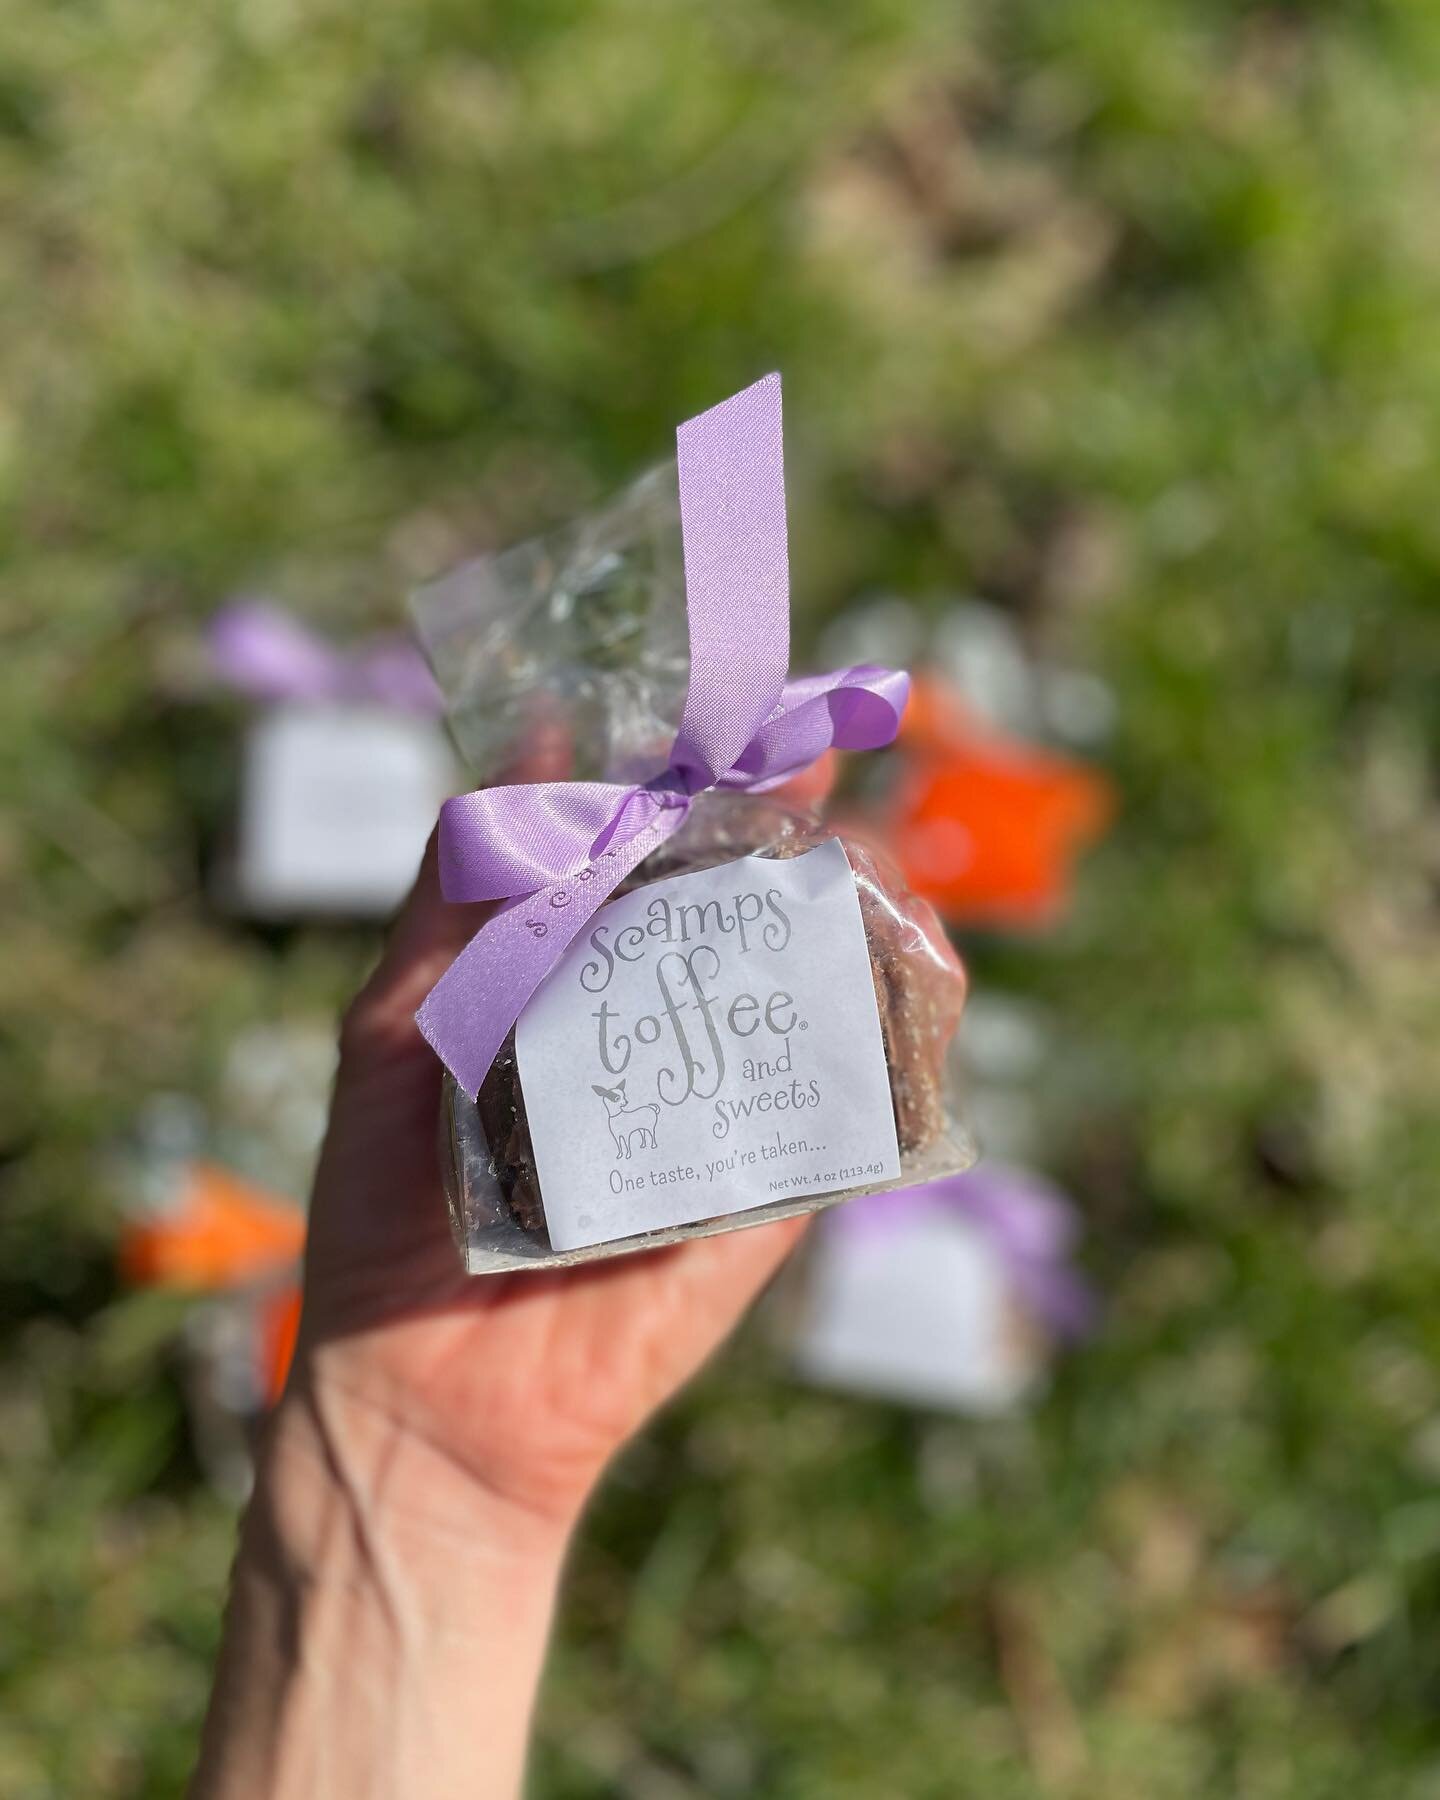 Spring has sprung and we are celebrating with a sweet treat! @scampstoffee is one of our beloved local vendors and we can&rsquo;t get enough of this adorable seasonal packaging! Their scrumptious toffee is available in milk or dark chocolate 💐